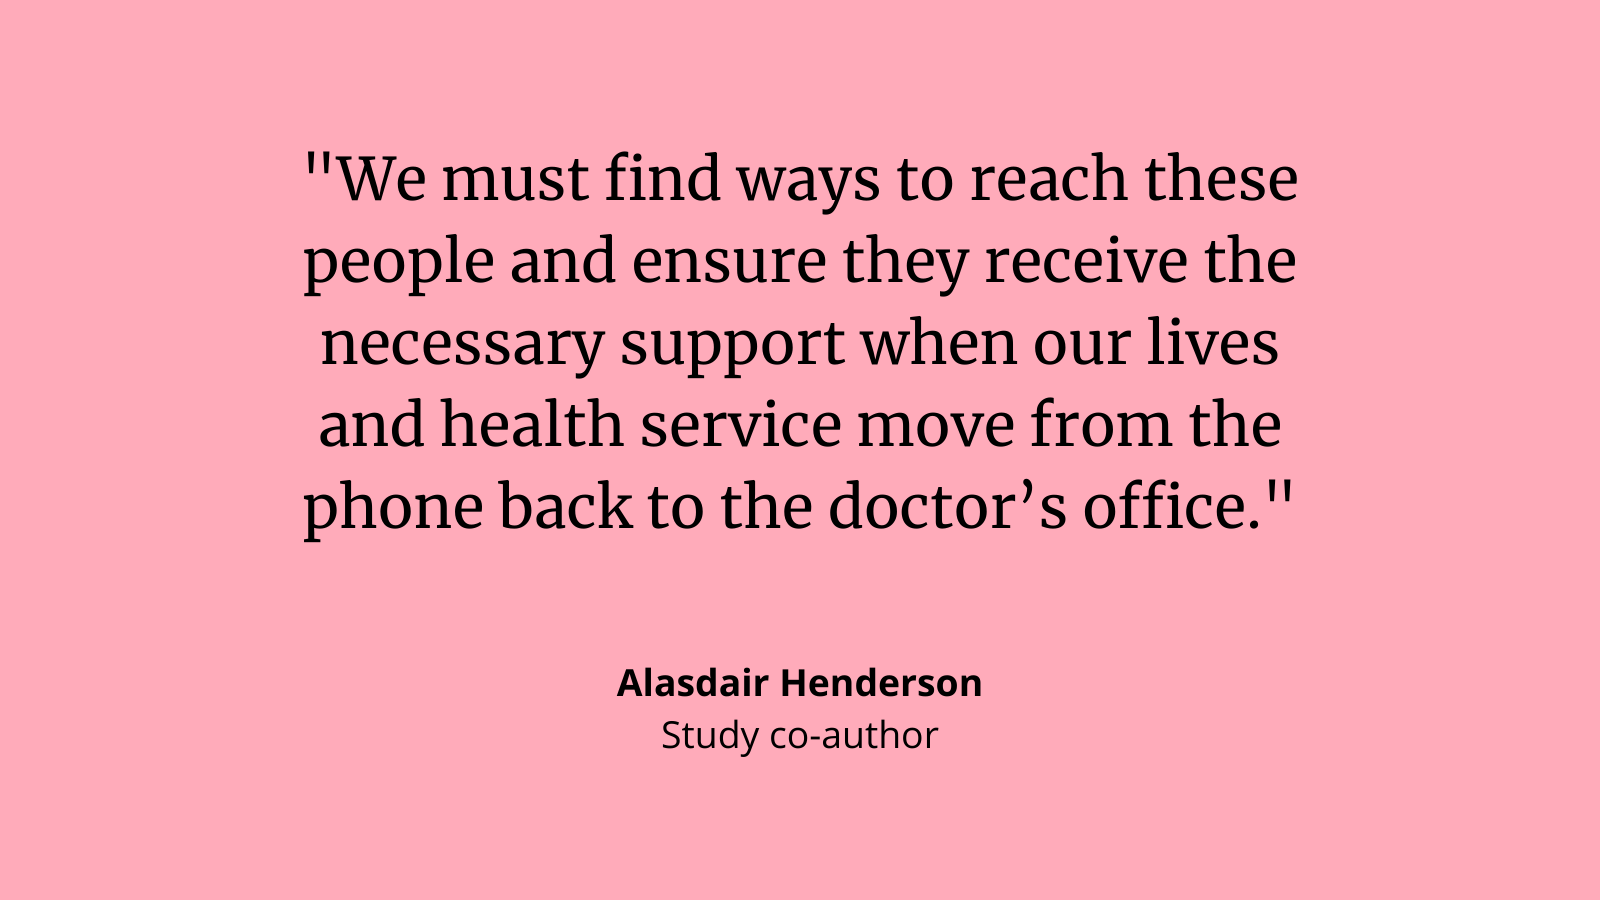 Alasdair Henderson: "We must find ways to reach these people and ensure they receive the necessary support when our lives and health service move from the phone back to the doctor’s office."